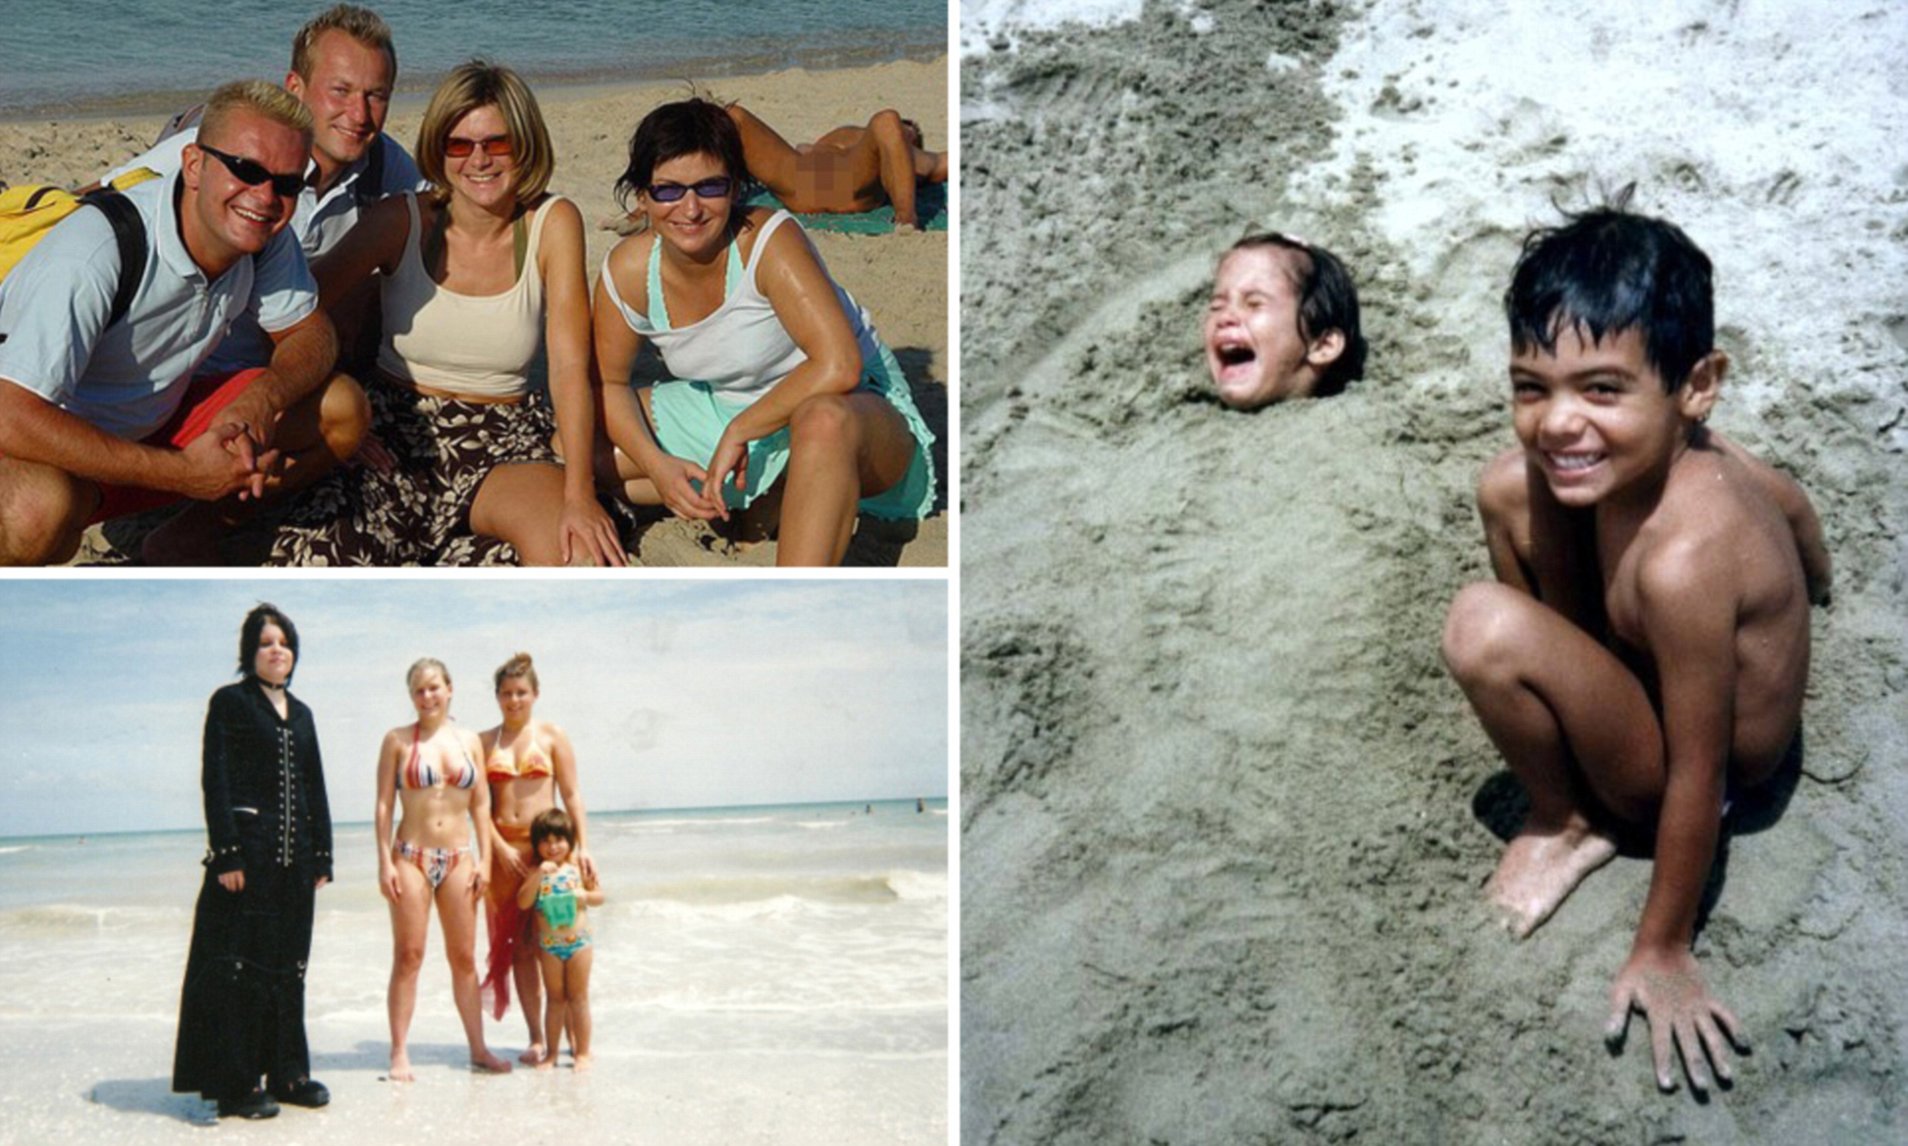 barbara drolet recommends family friendly nude beach pic